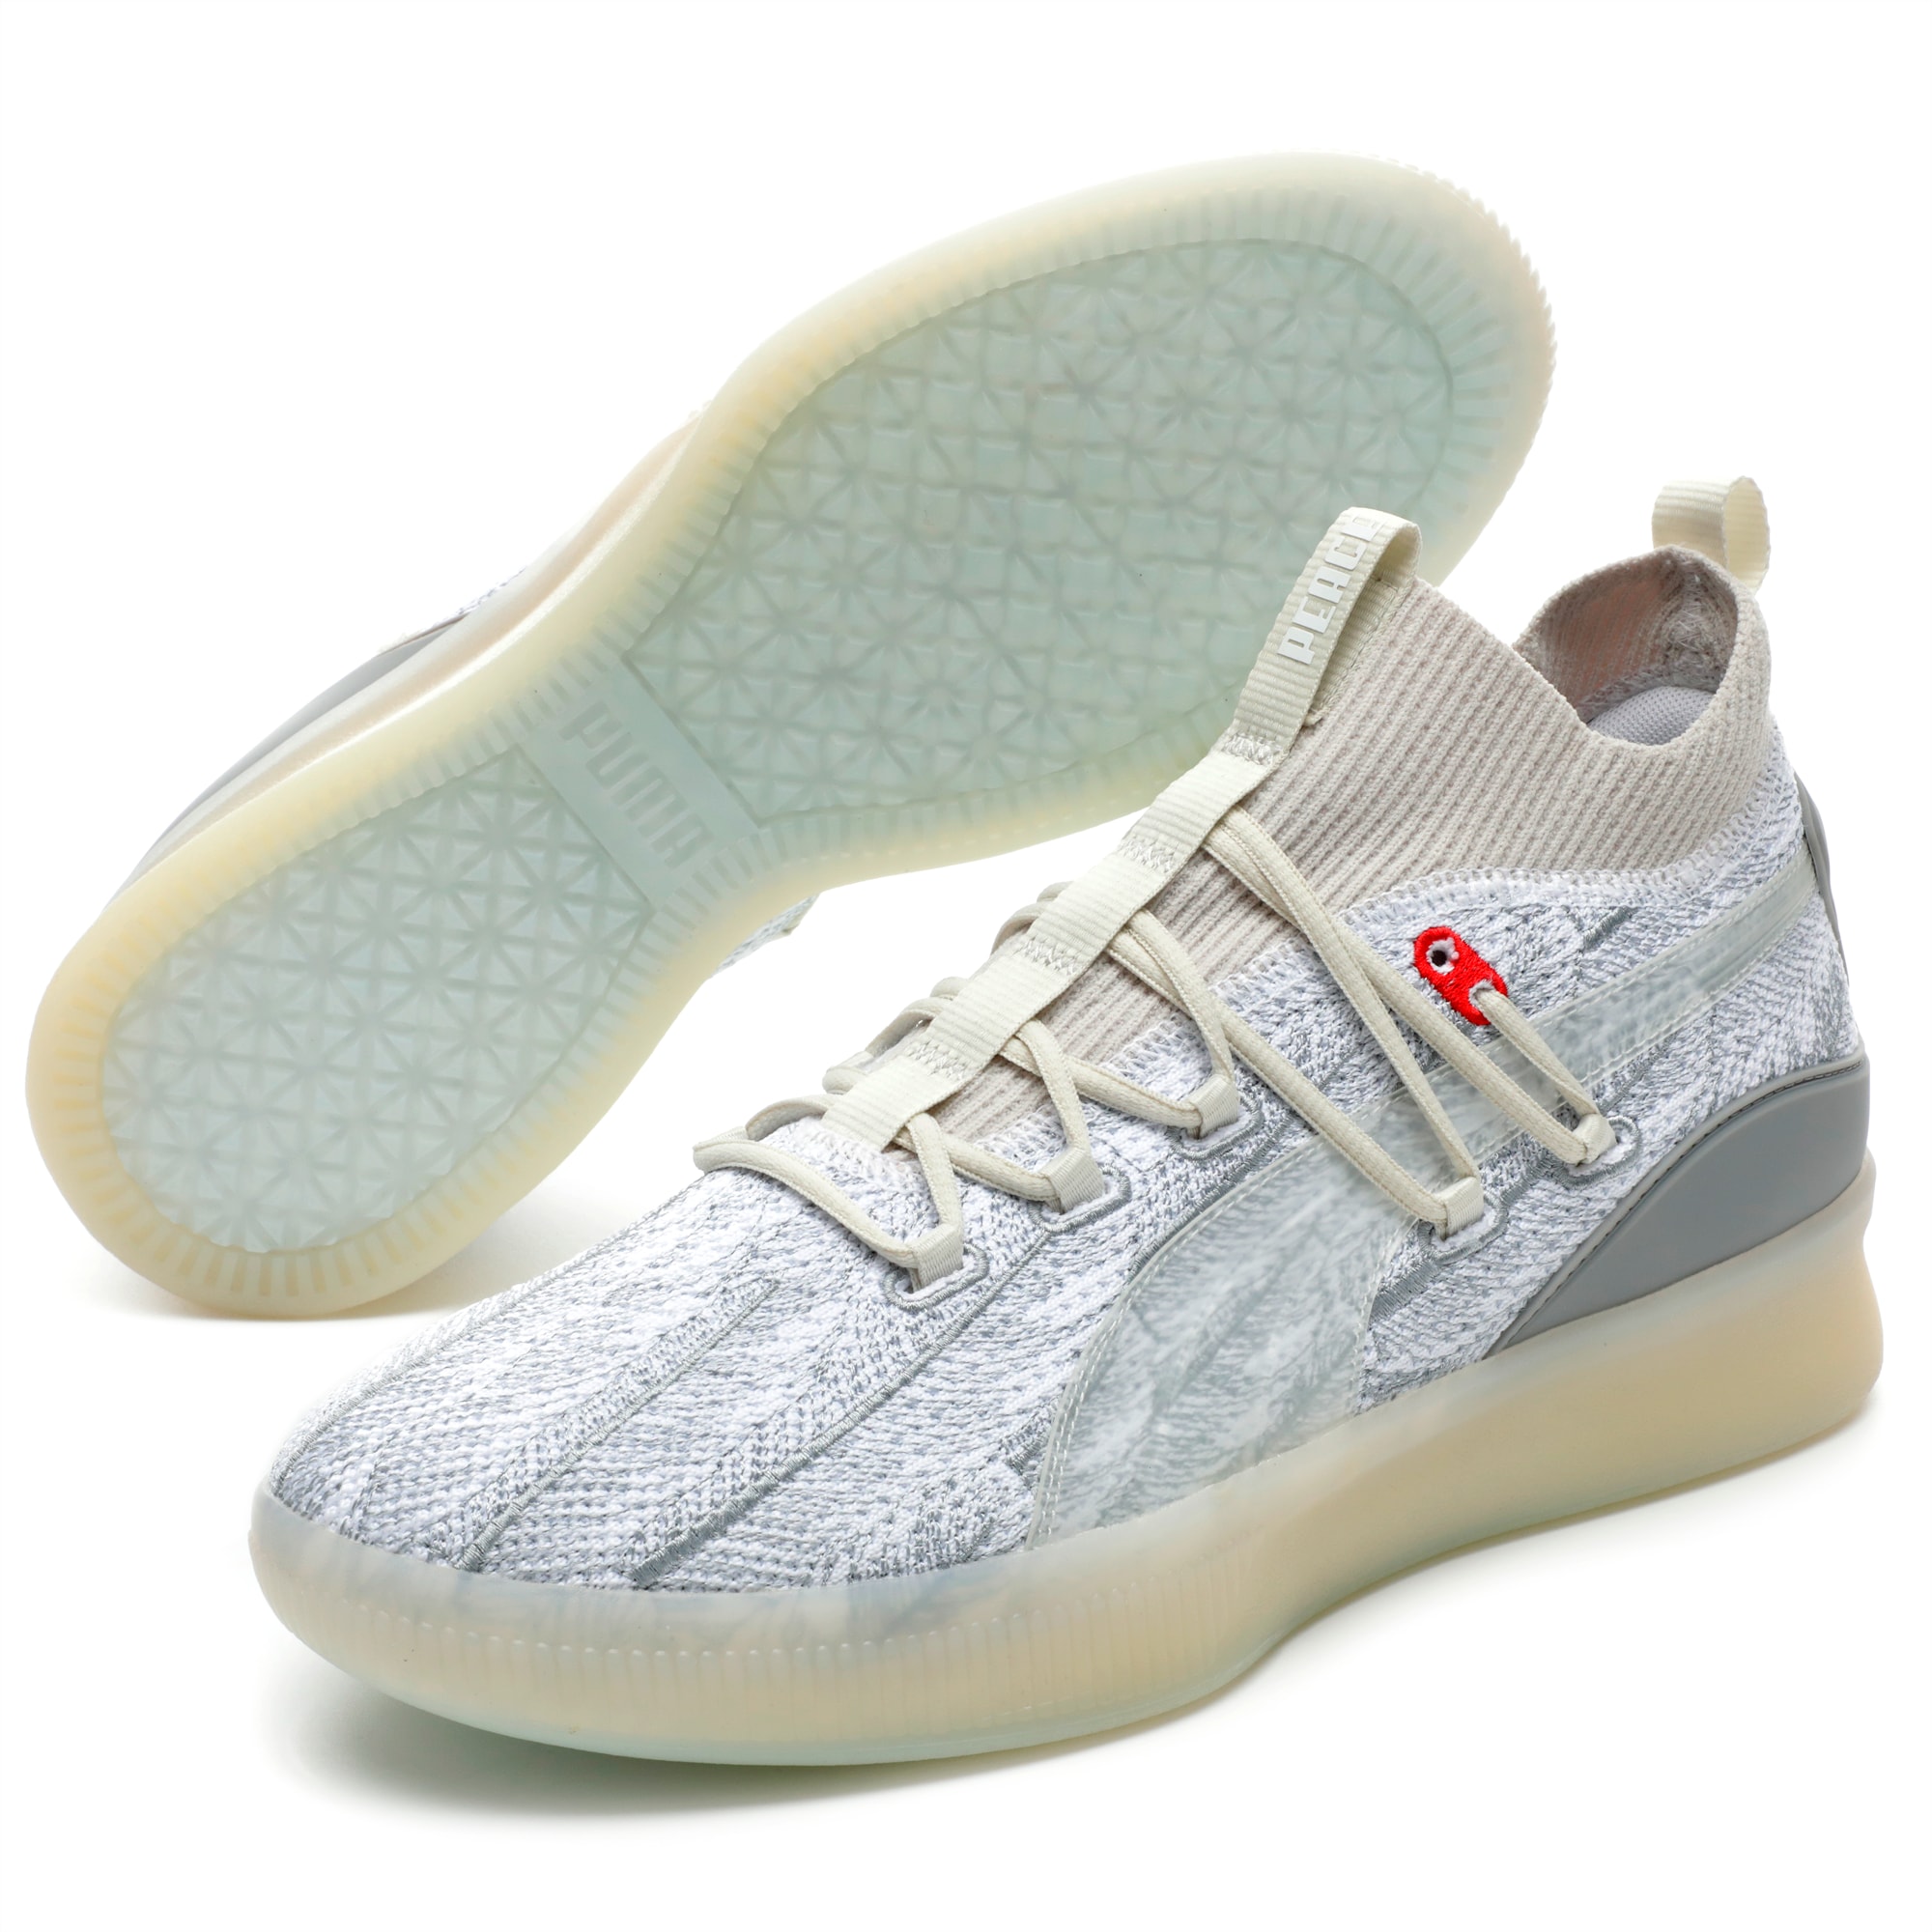 clyde court peace on earth men's basketball shoes